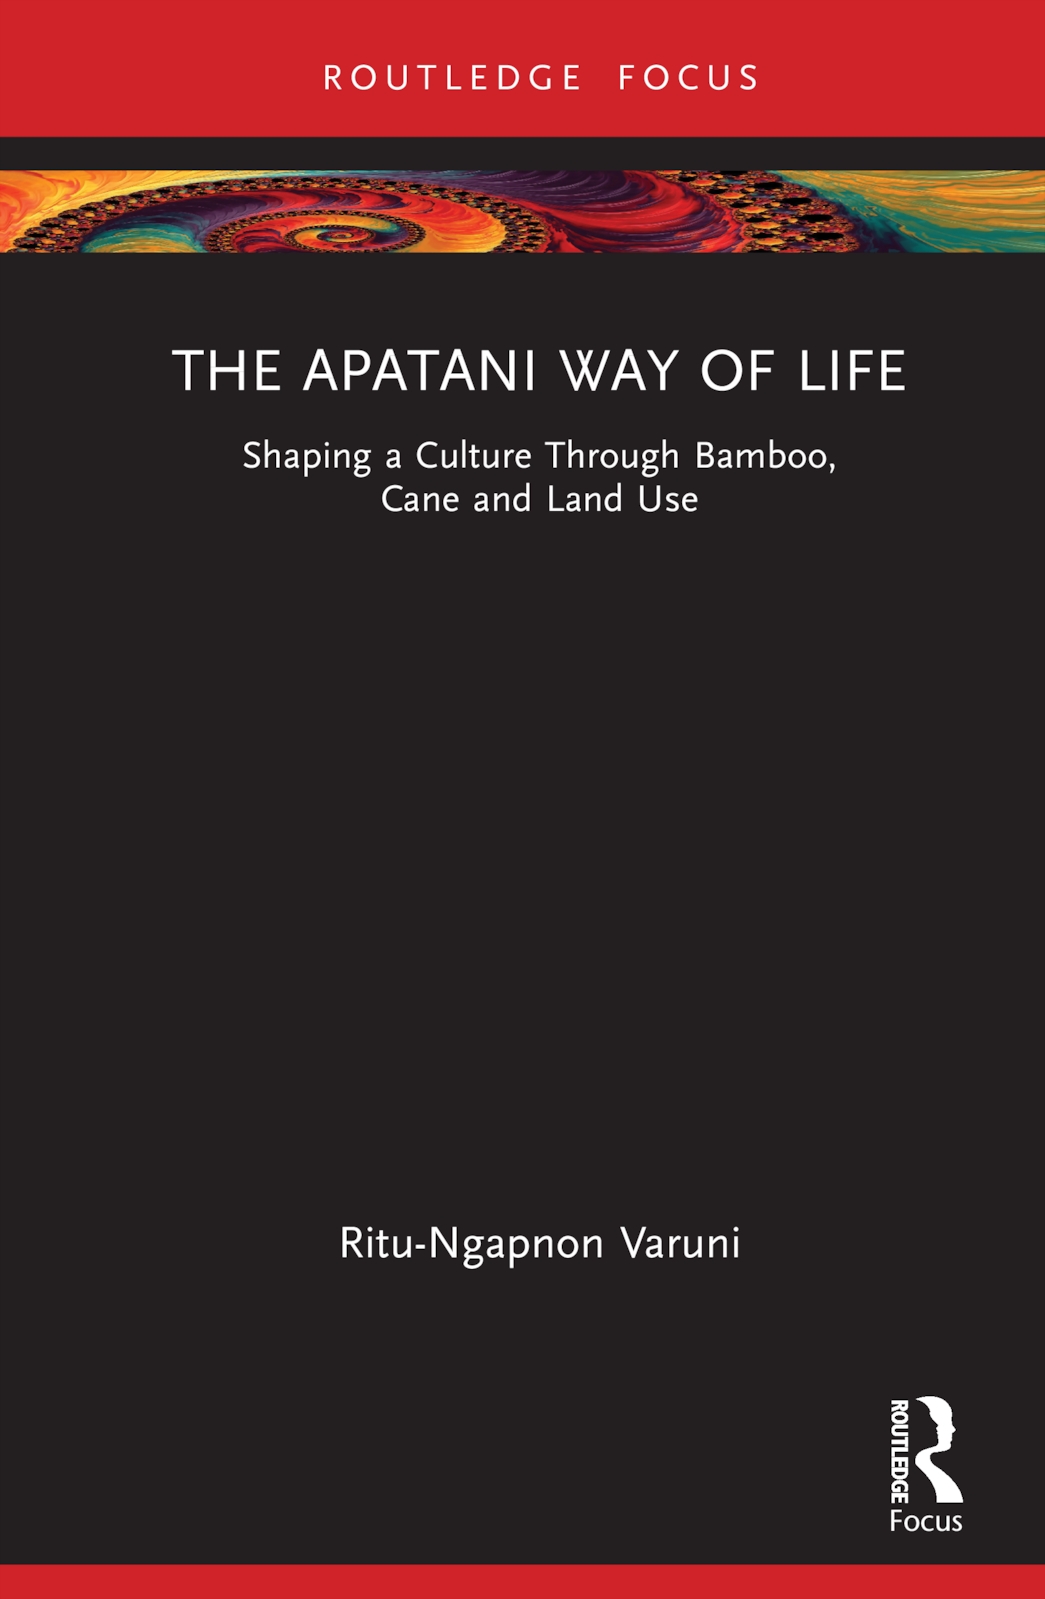 The Apatani Way of Life: Practices of Architecture Through Bamboo, Cane, and Land Use